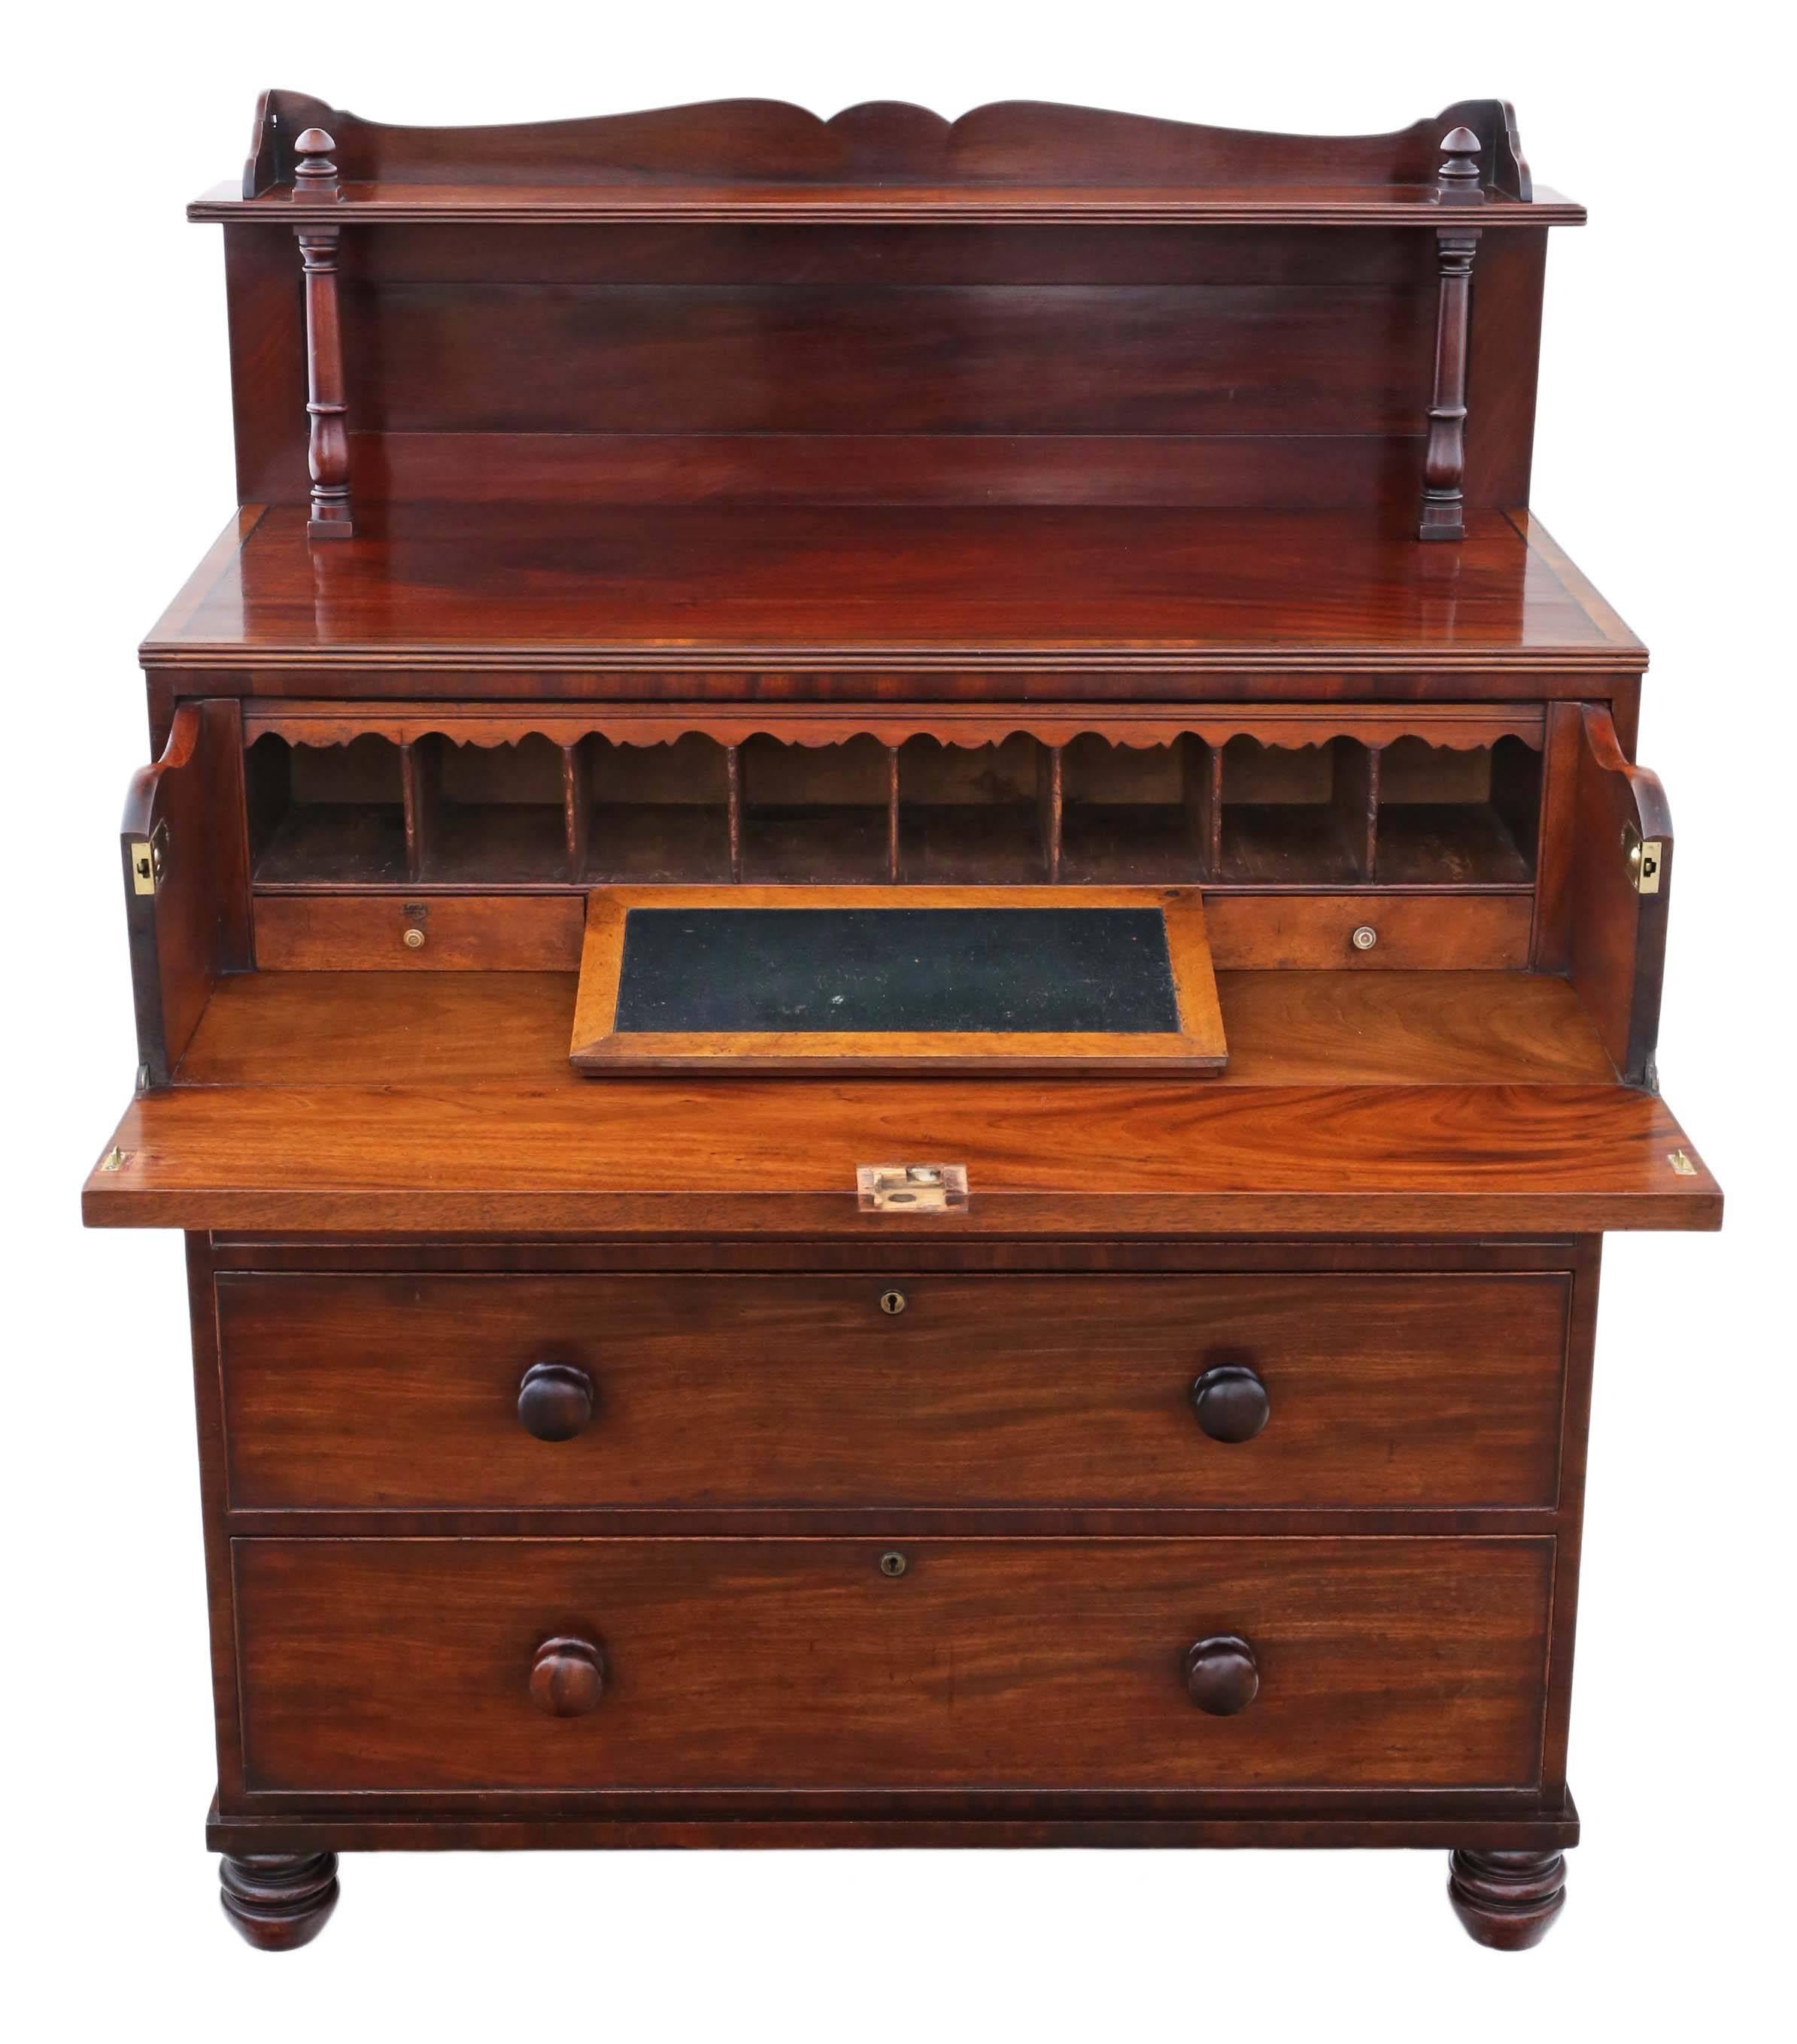 British Antique Regency William IV Mahogany Secretaire Desk Writing Chest of Drawers For Sale